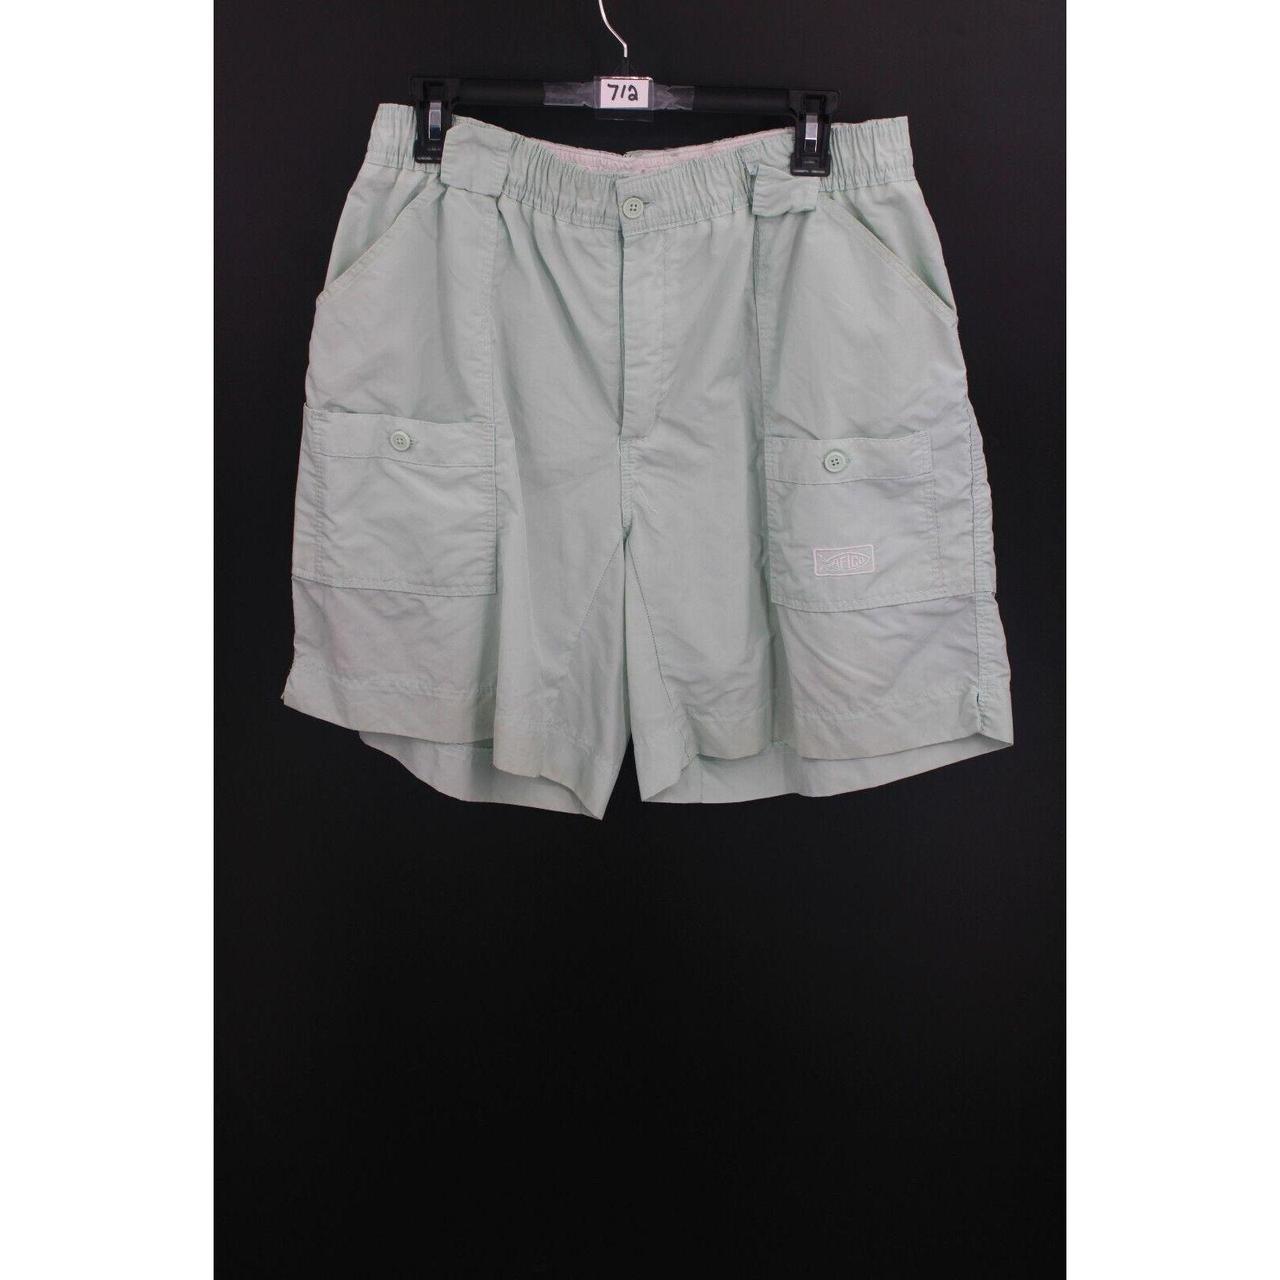 AFTCO MINT GREEN FISHING SHORTS MENS SIZE 36, GREAT